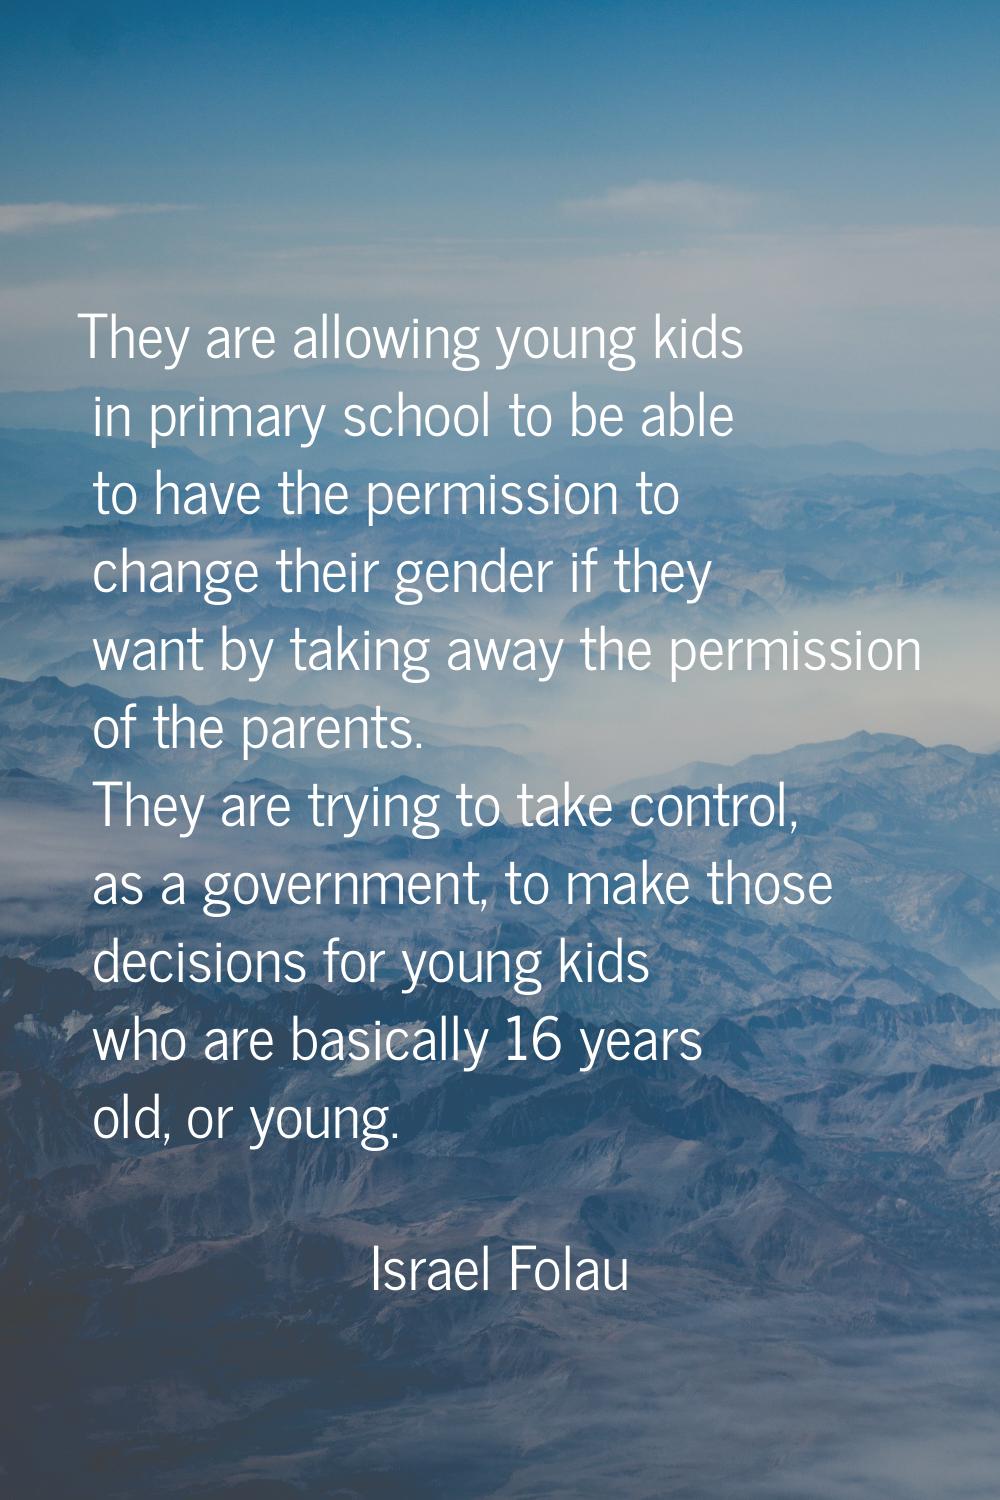 They are allowing young kids in primary school to be able to have the permission to change their ge